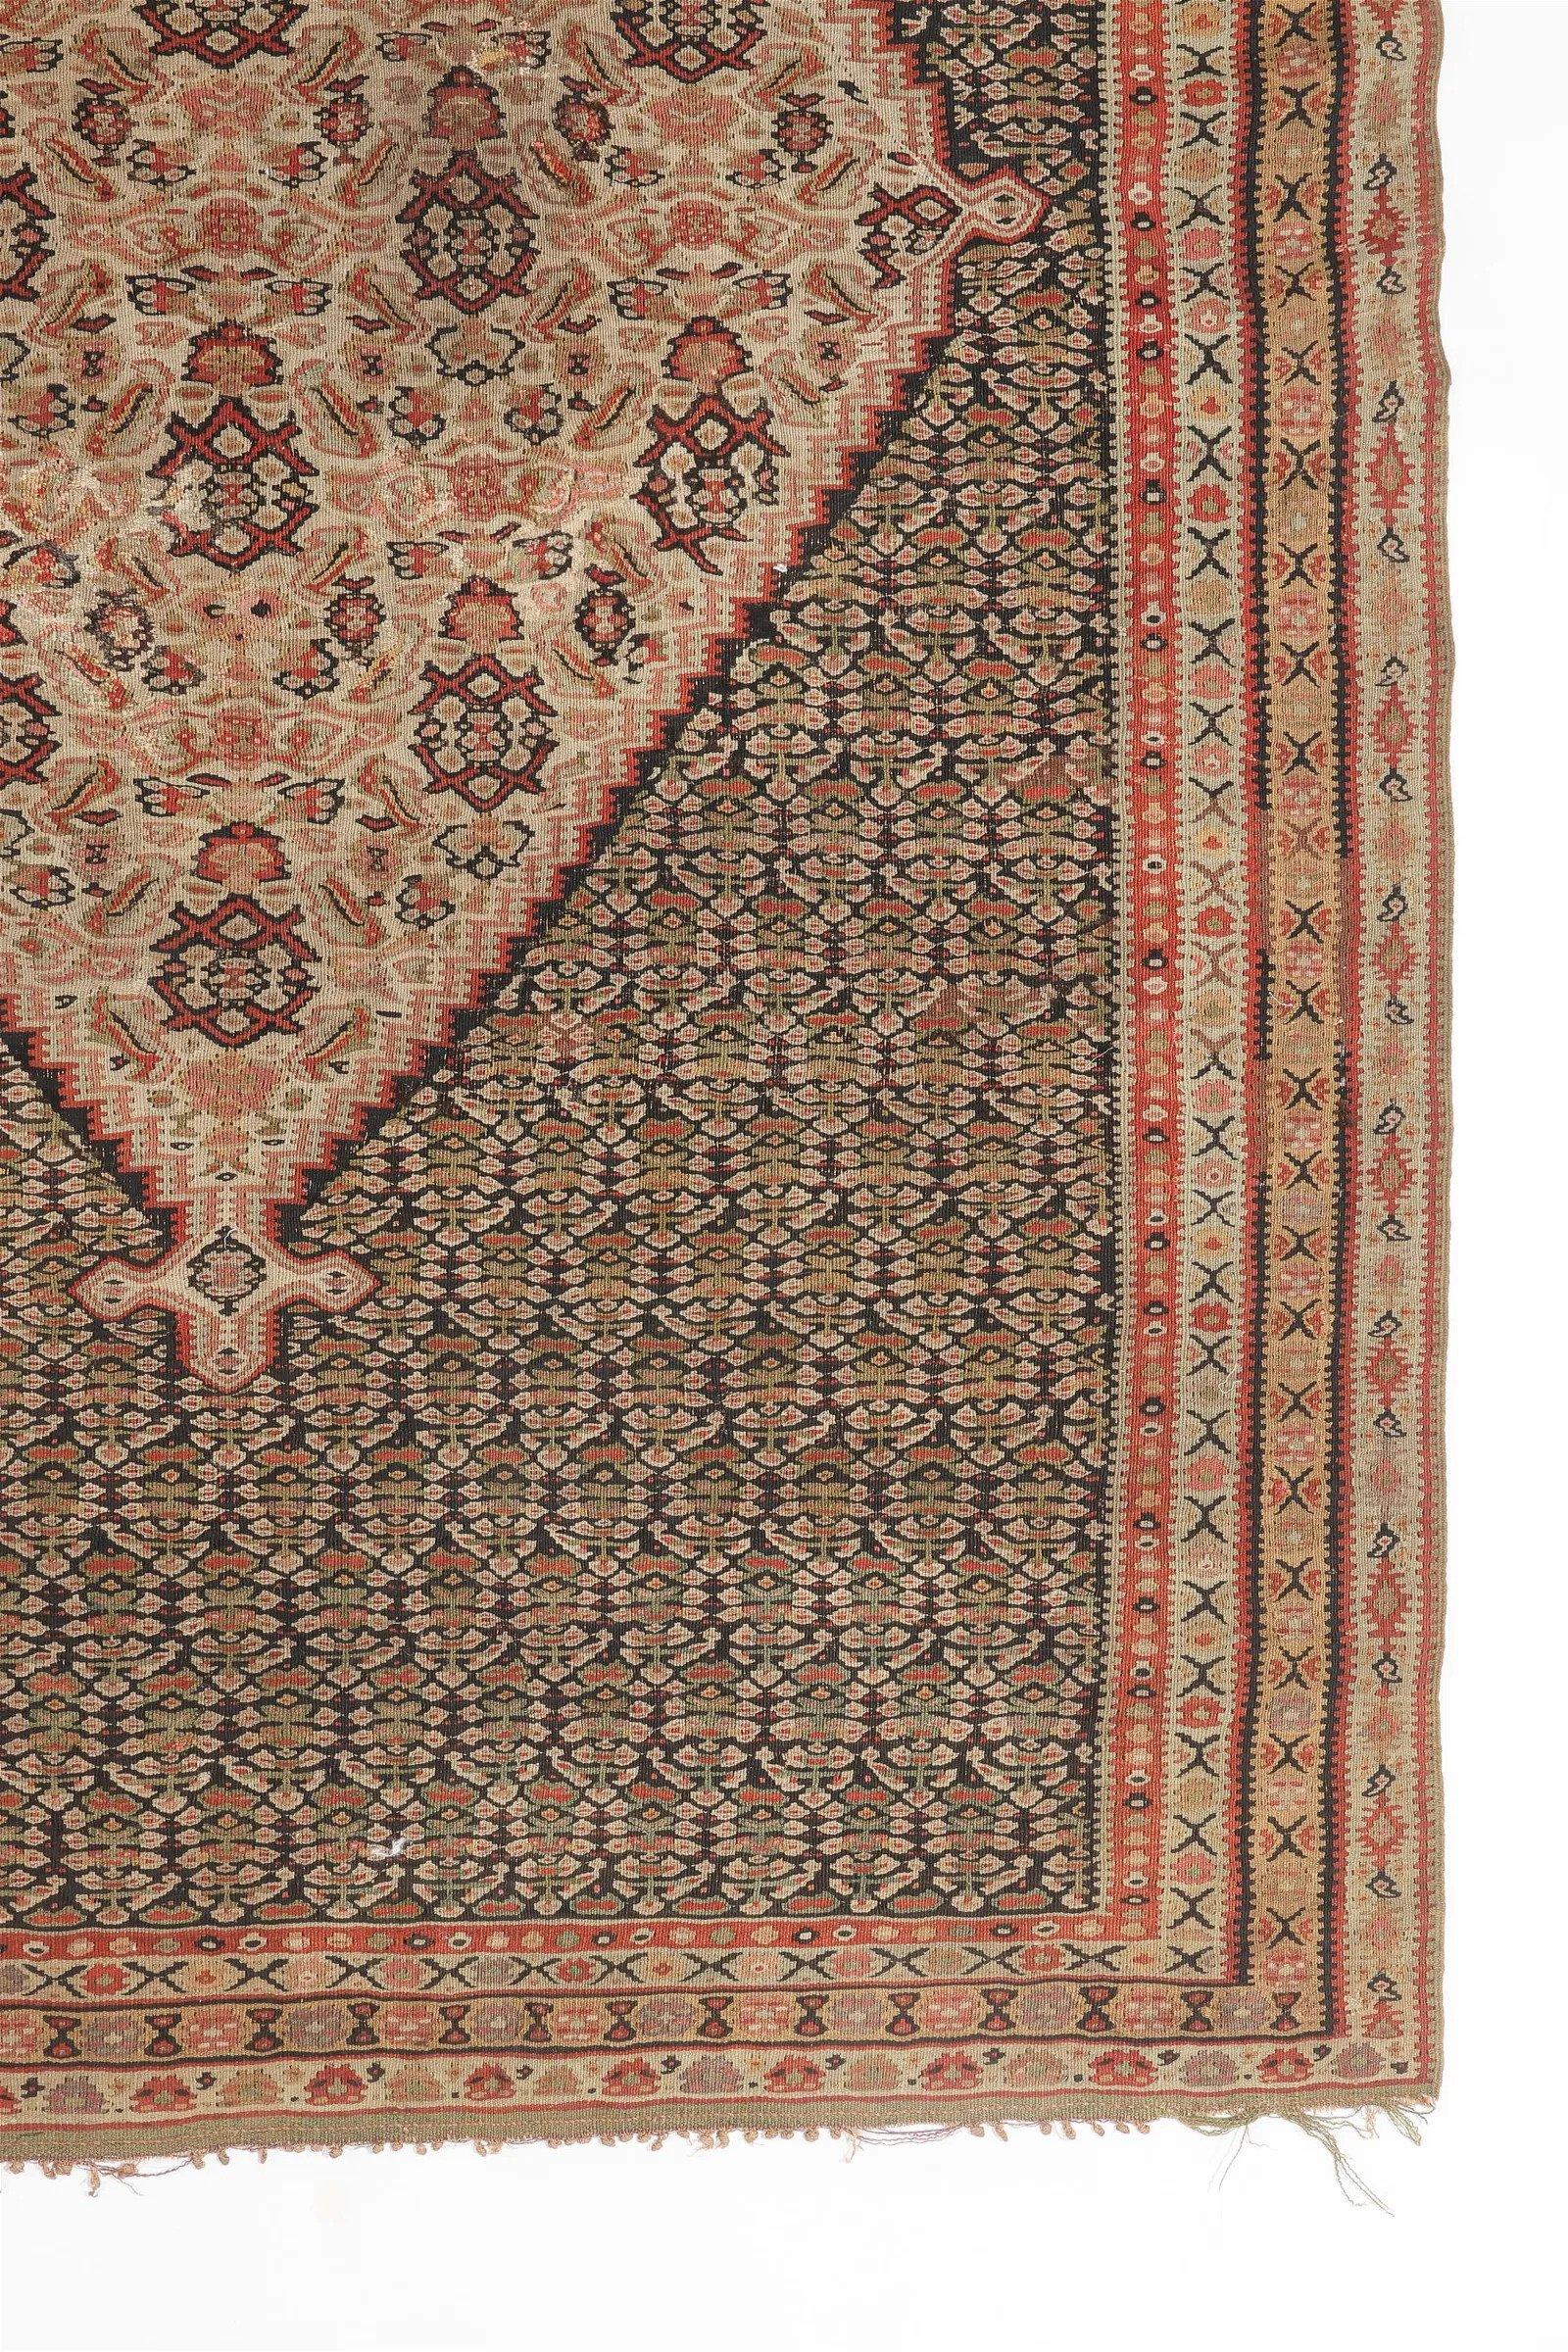 This Senneh Kilim Wool Rug originated from Persia in the late 19th century. Features a central medallion against a delicate paisley, or “boteh” motif.